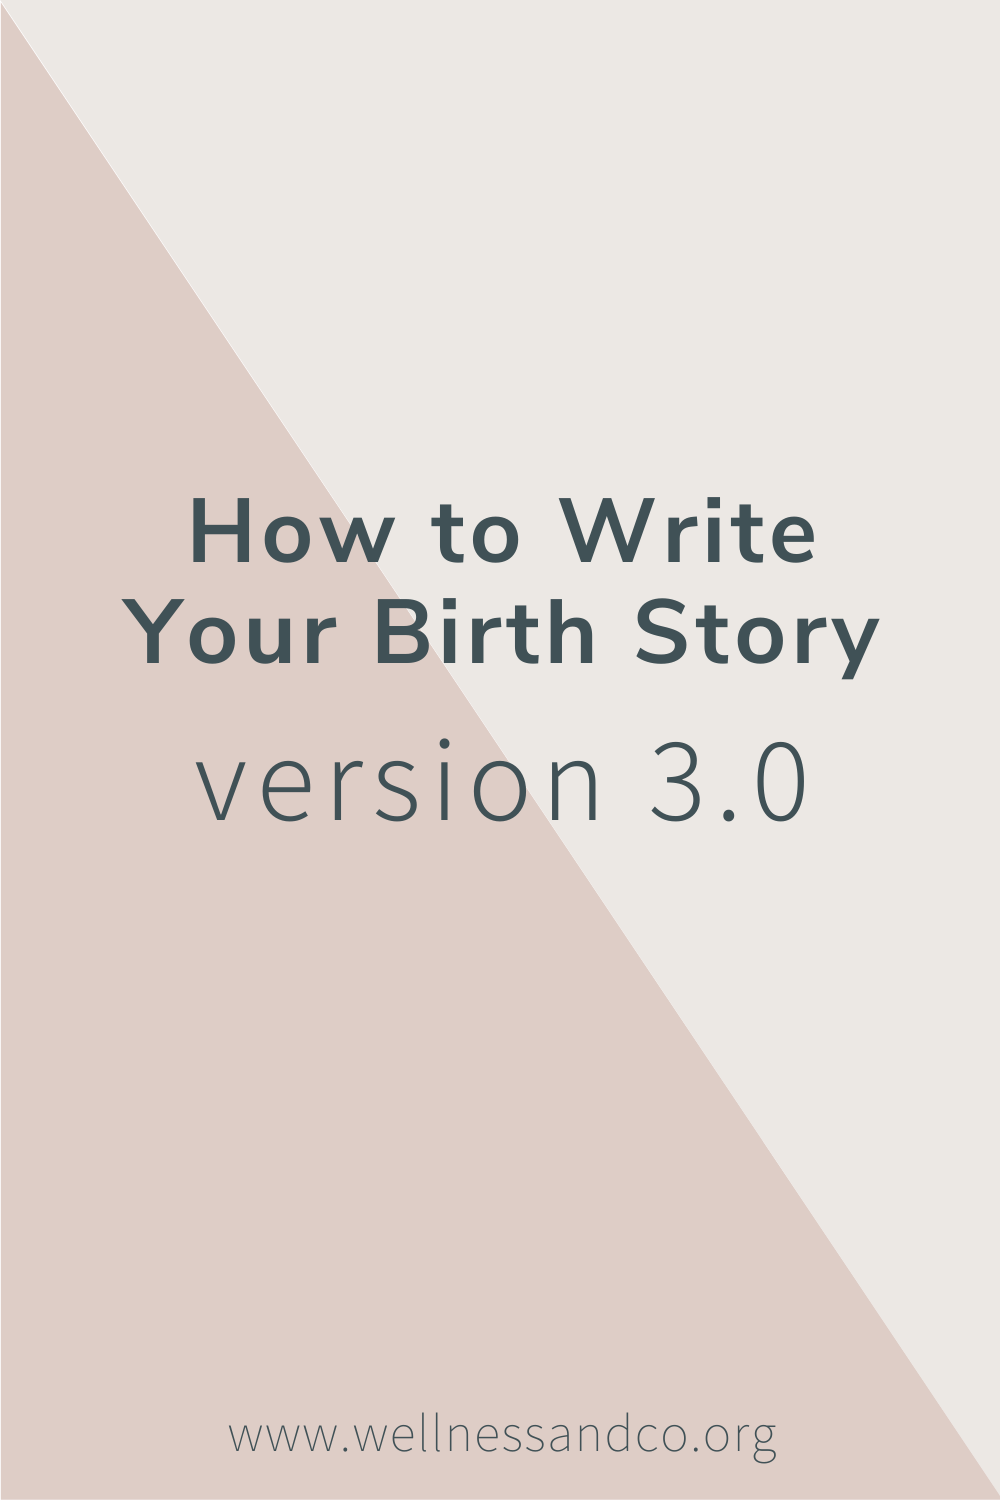 How to Write Your Birth Story Part III | If you want to heal from birth trauma, postpartum depression or anxiety, or grow as a mom, begin with your birth story. Writing your birth story can lead to a healthier perspective and momma! This blog includes exactly how to write your birth story and why that's so important for your mental health - cheers!